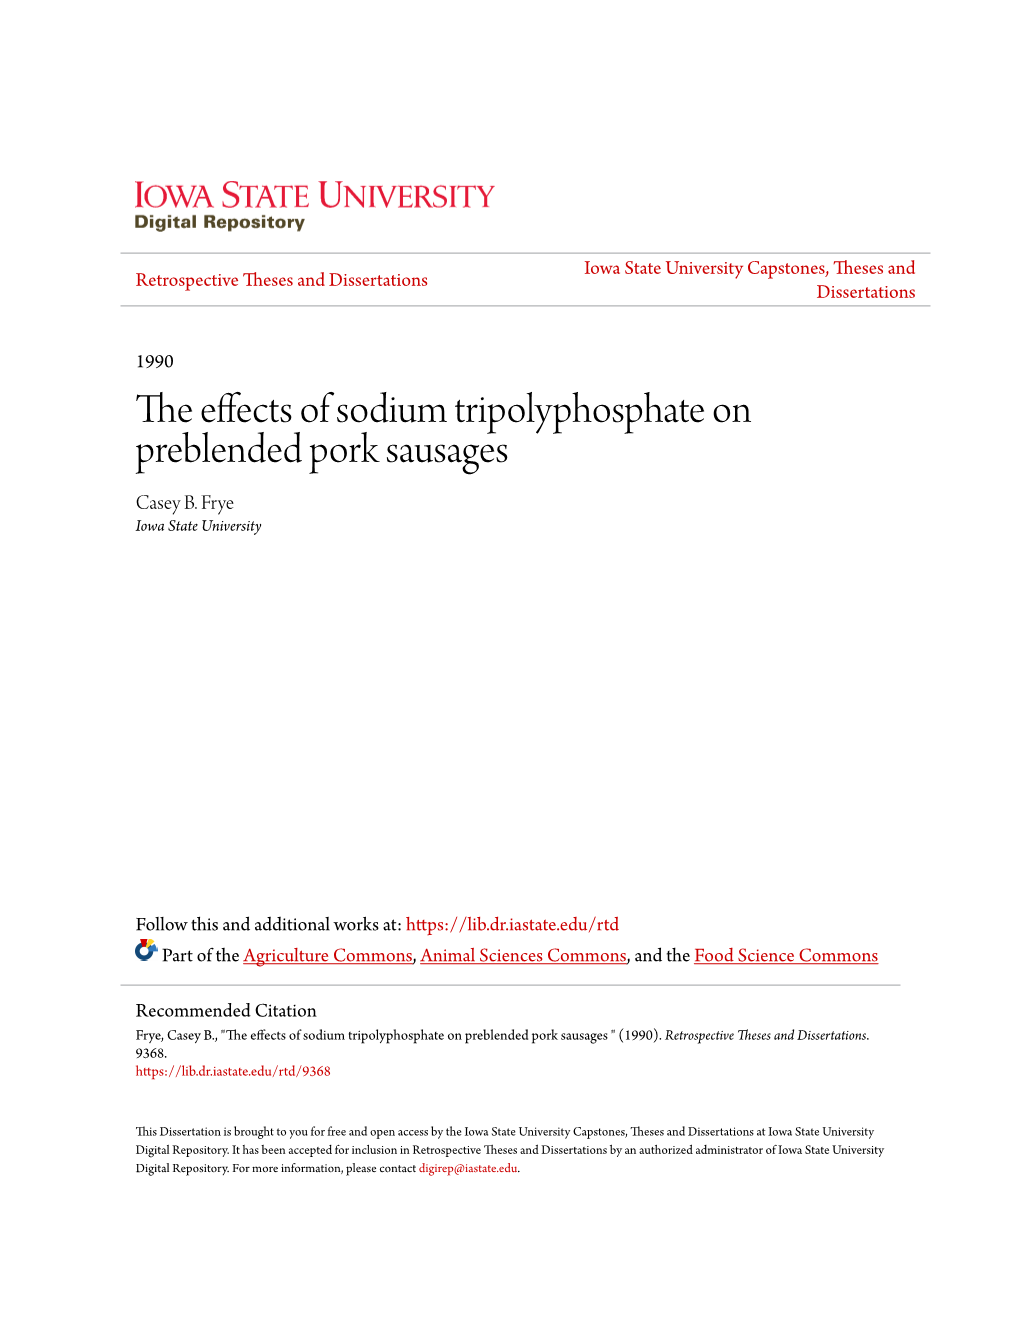 The Effects of Sodium Tripolyphosphate on Preblended Pork Sausages Casey B